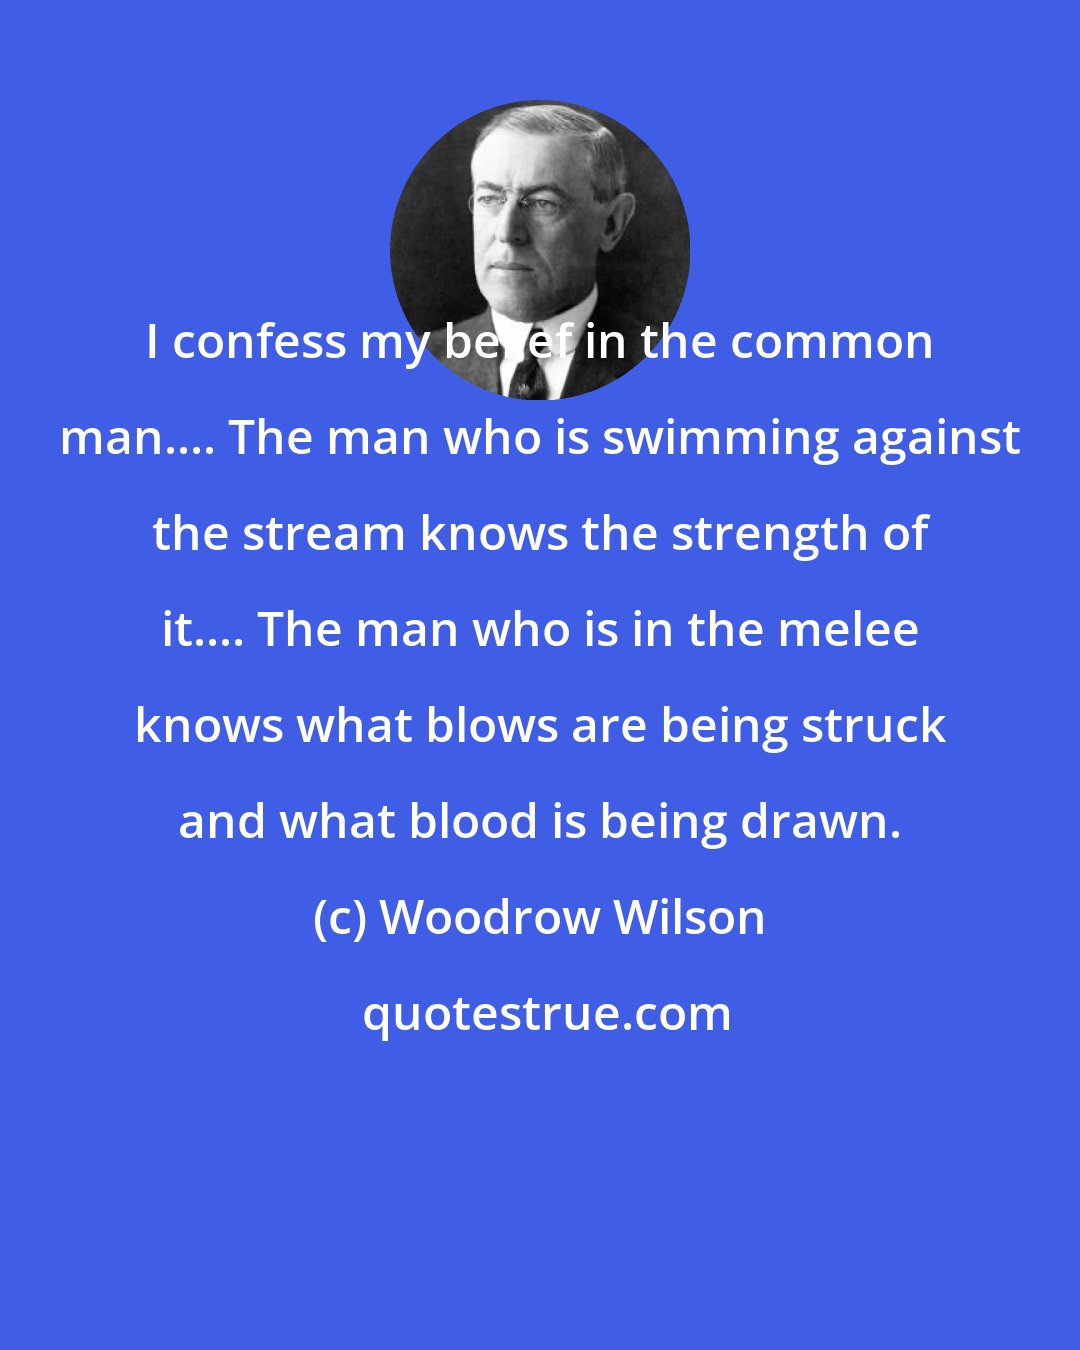 Woodrow Wilson: I confess my belief in the common man.... The man who is swimming against the stream knows the strength of it.... The man who is in the melee knows what blows are being struck and what blood is being drawn.